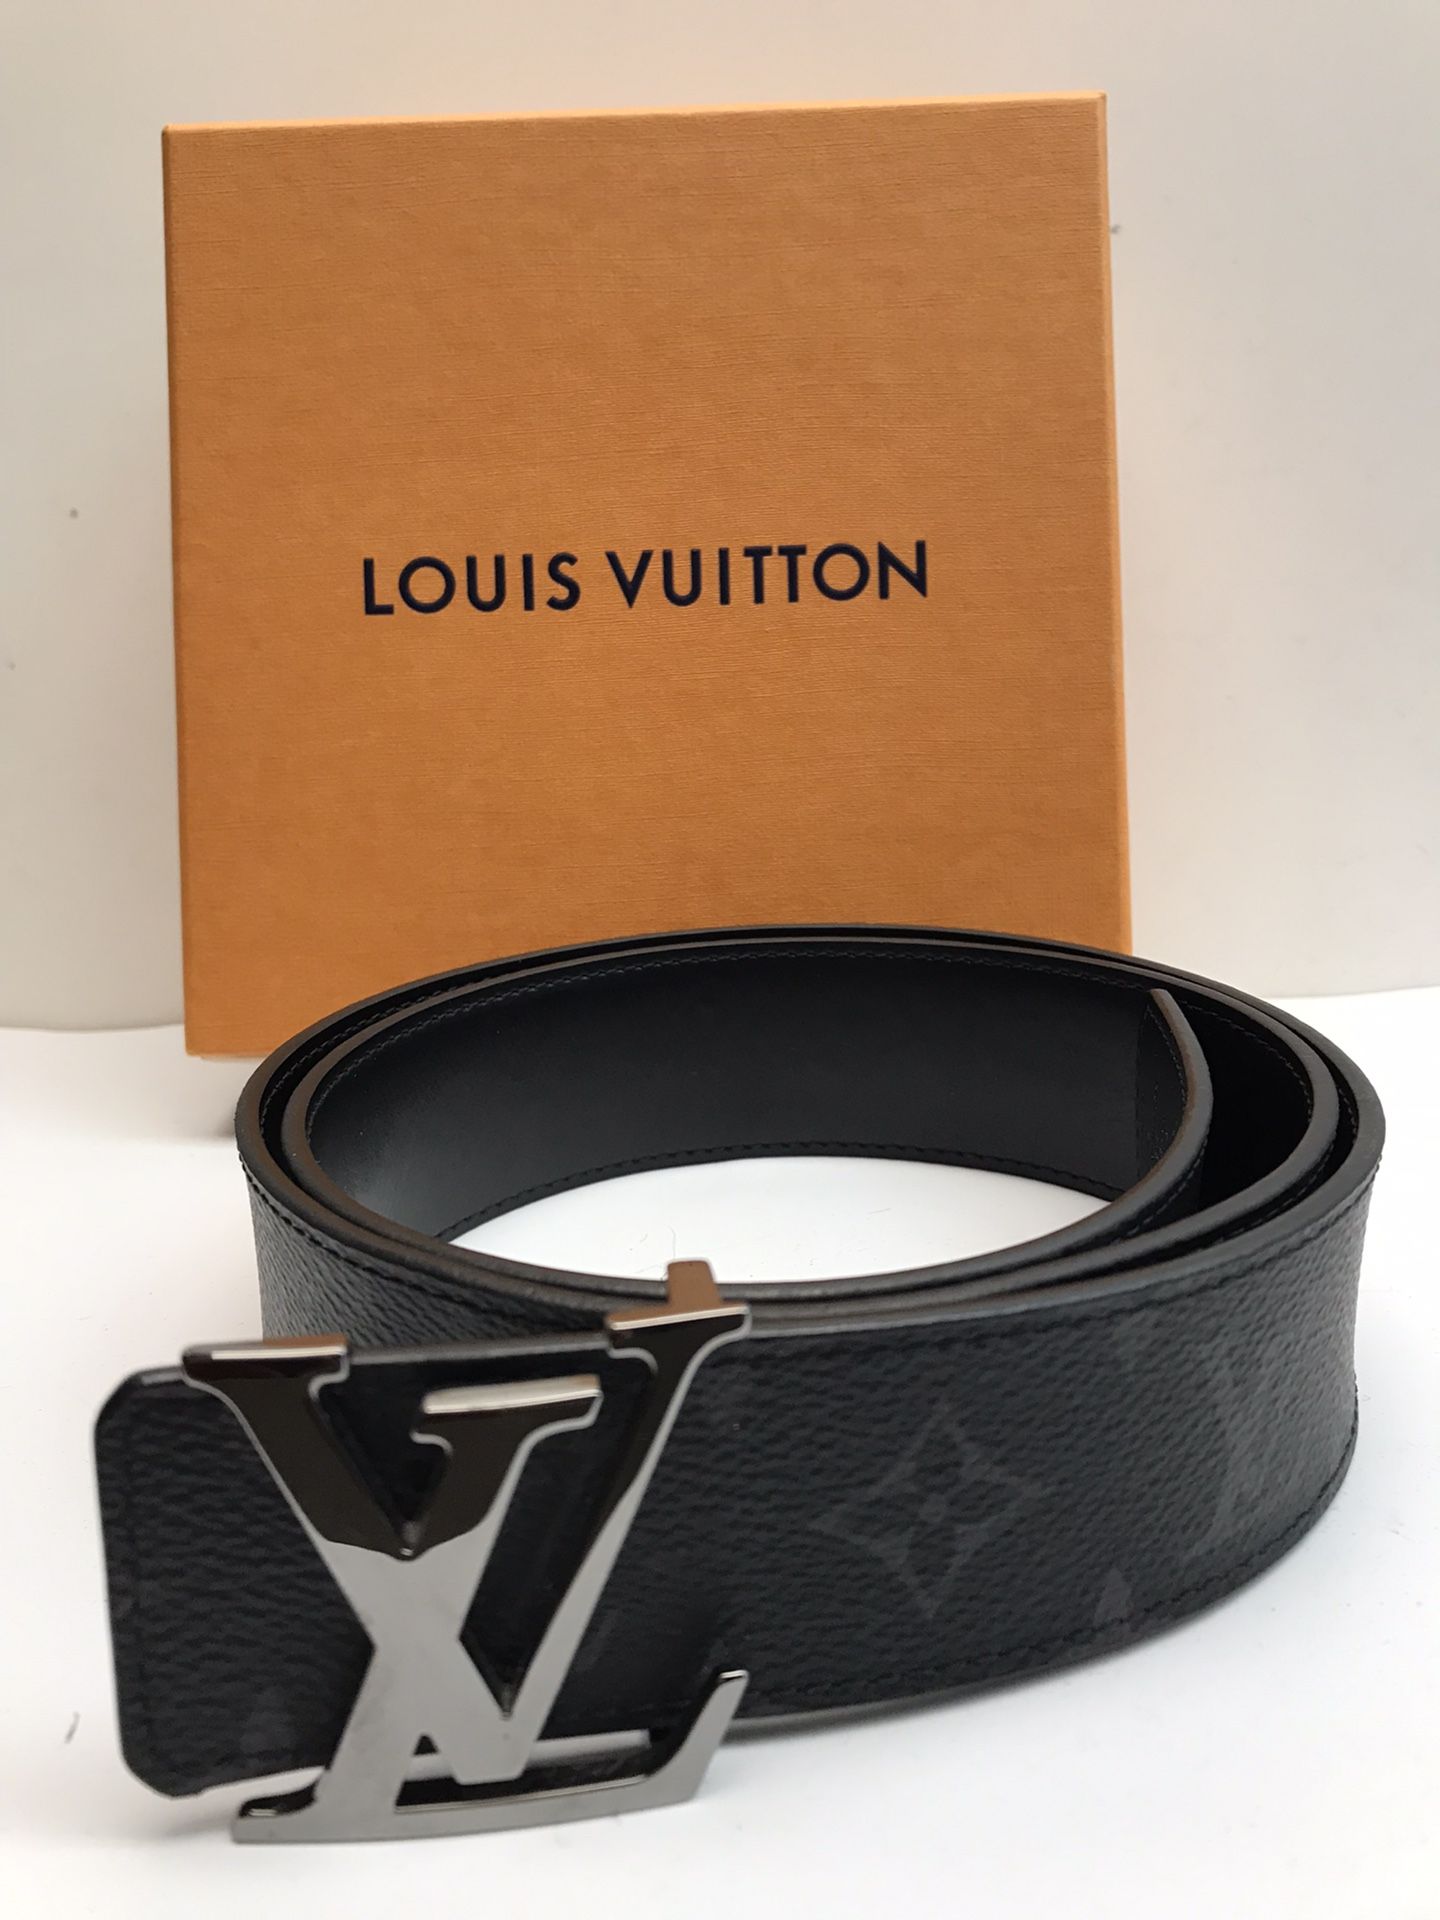 Louis Vuitton Belt for Sale in Lynbrook, NY - OfferUp